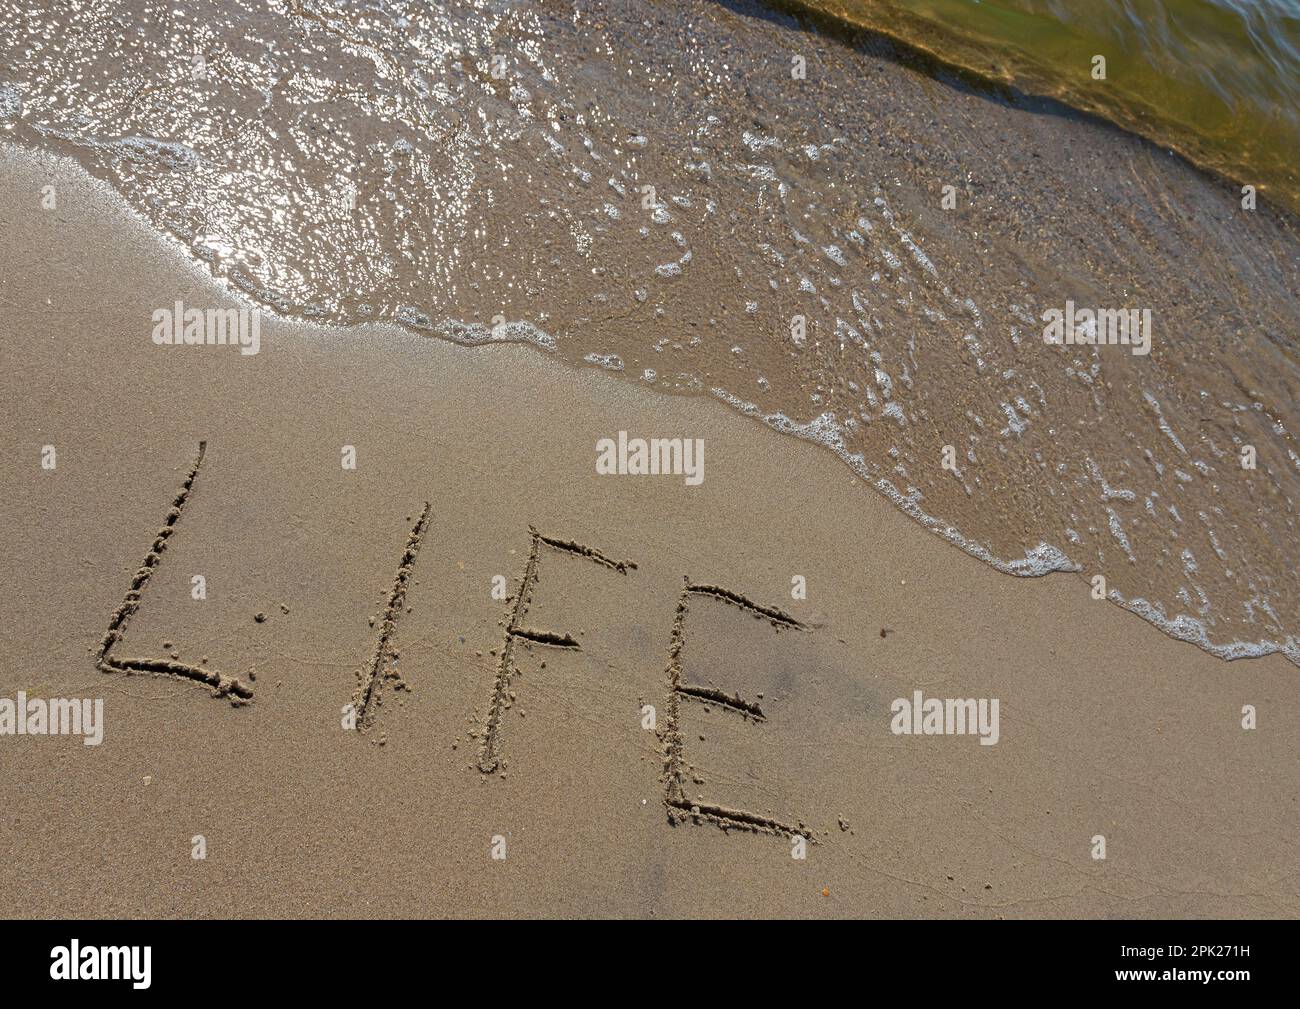 The inscription Life on the sand of the seashore. The concept of lifestyle, thirst for life, happiness, freedom, enjoyment of life. Stock Photo